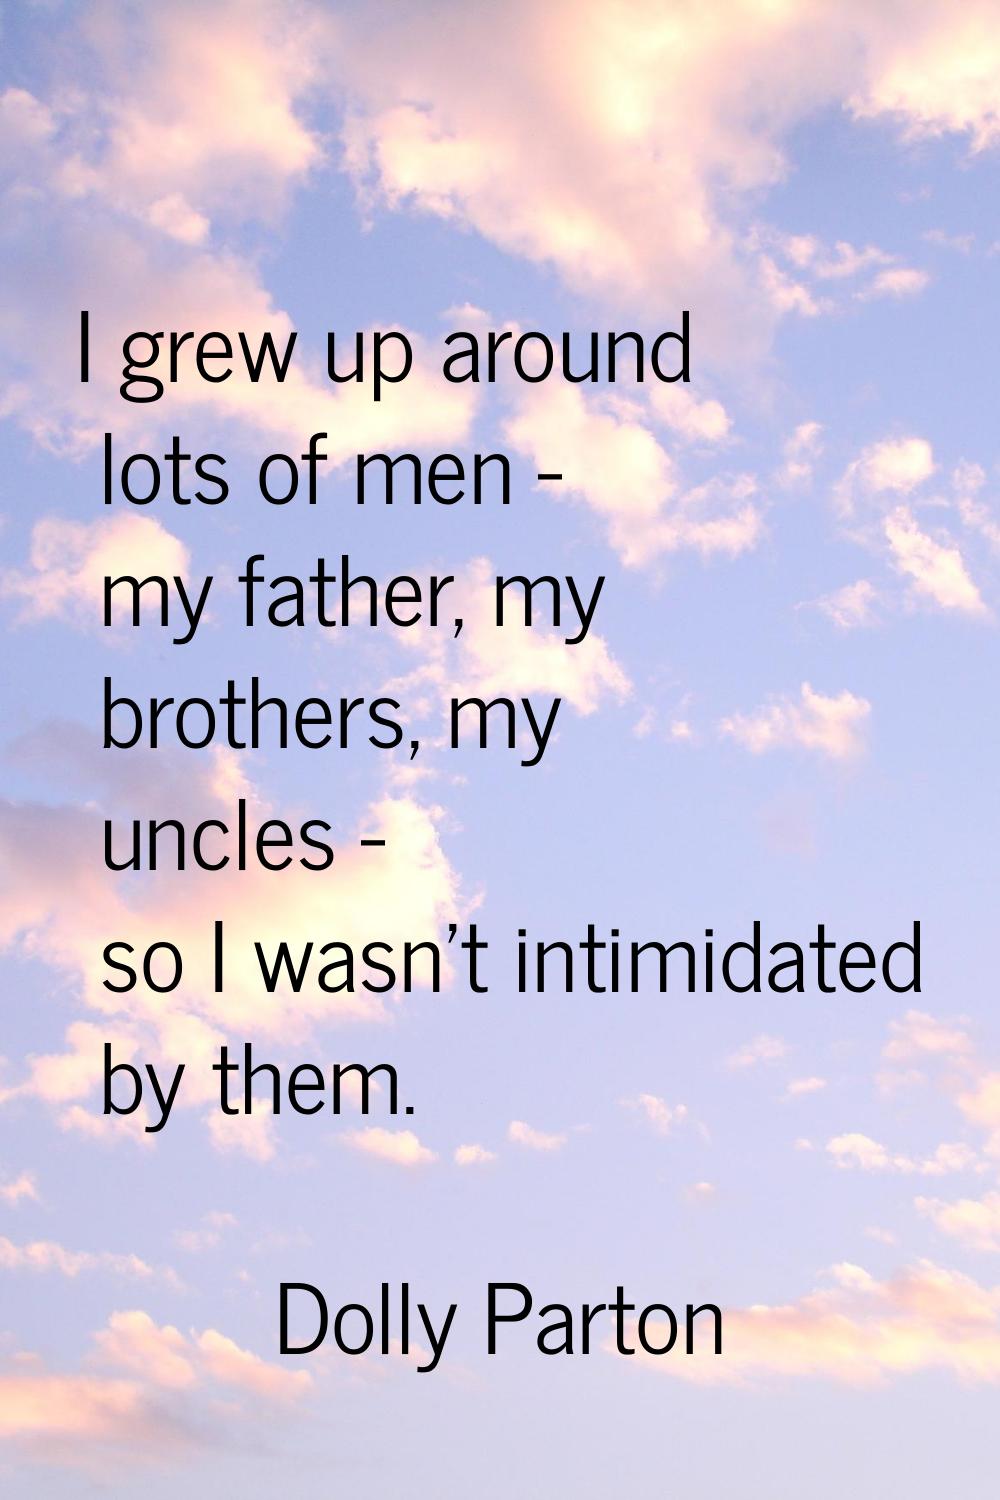 I grew up around lots of men - my father, my brothers, my uncles - so I wasn't intimidated by them.